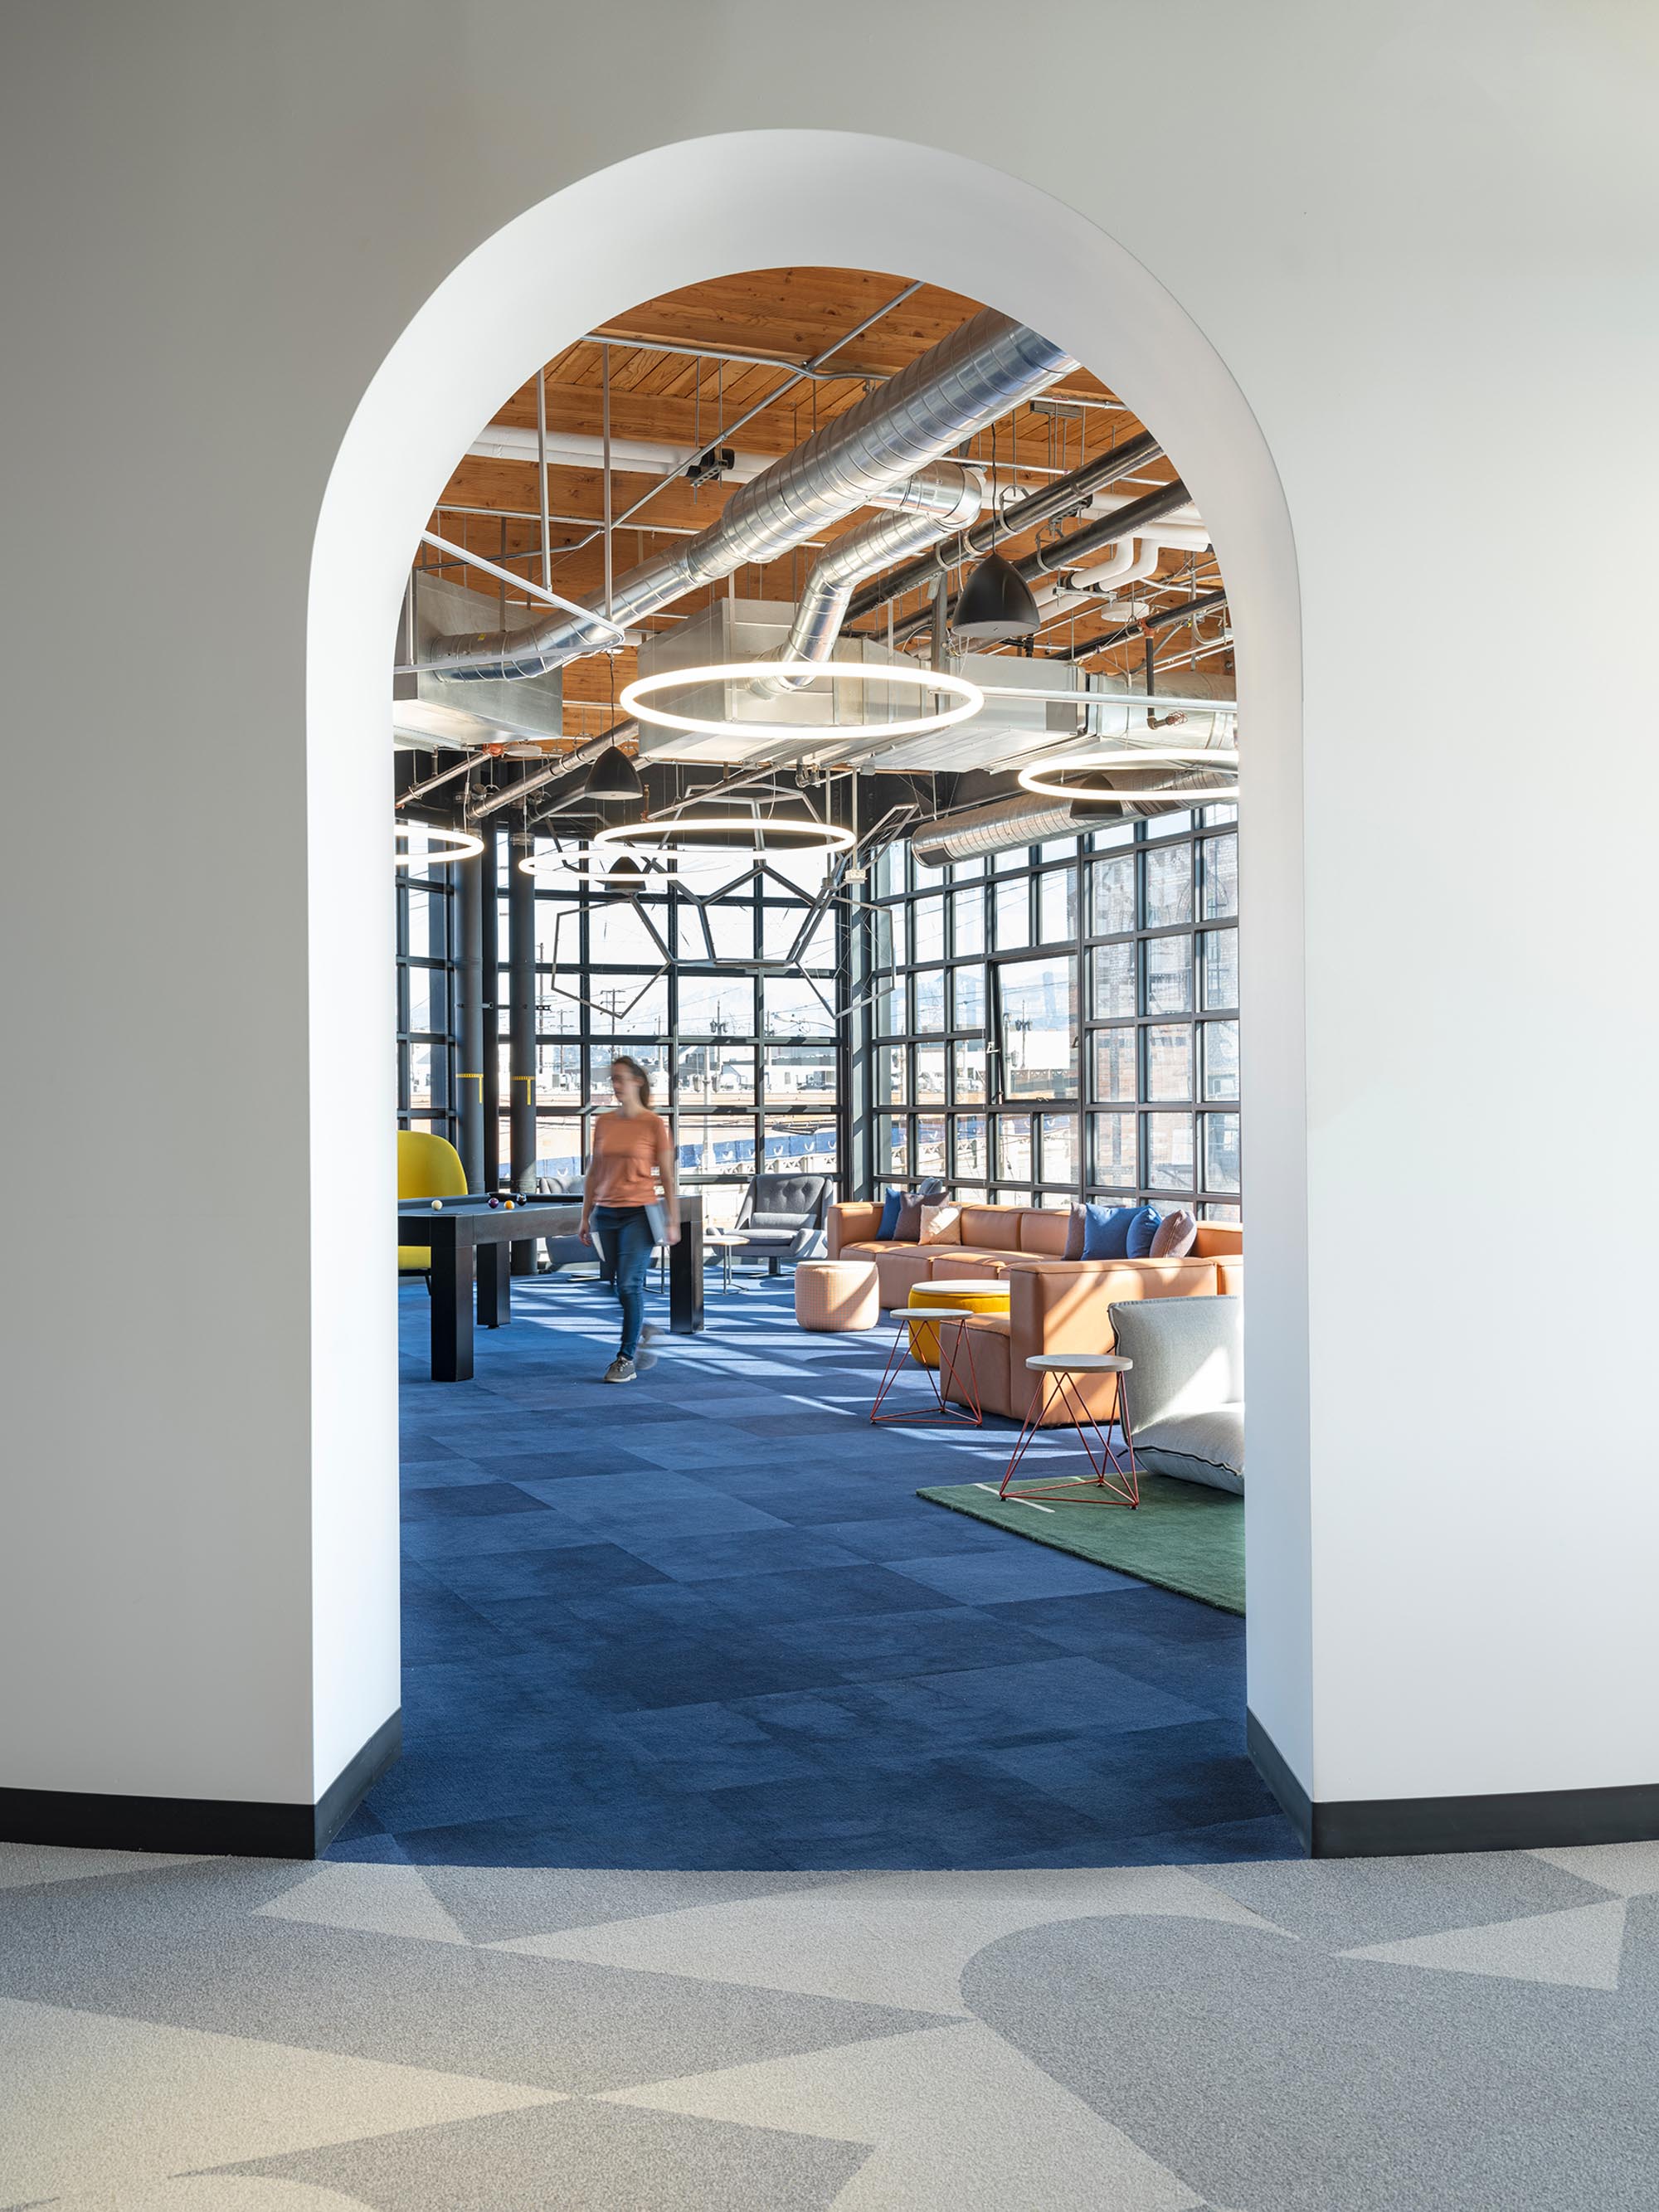 Arched entry looking into the interior workplace at Spotify with blue floors and colorful couches